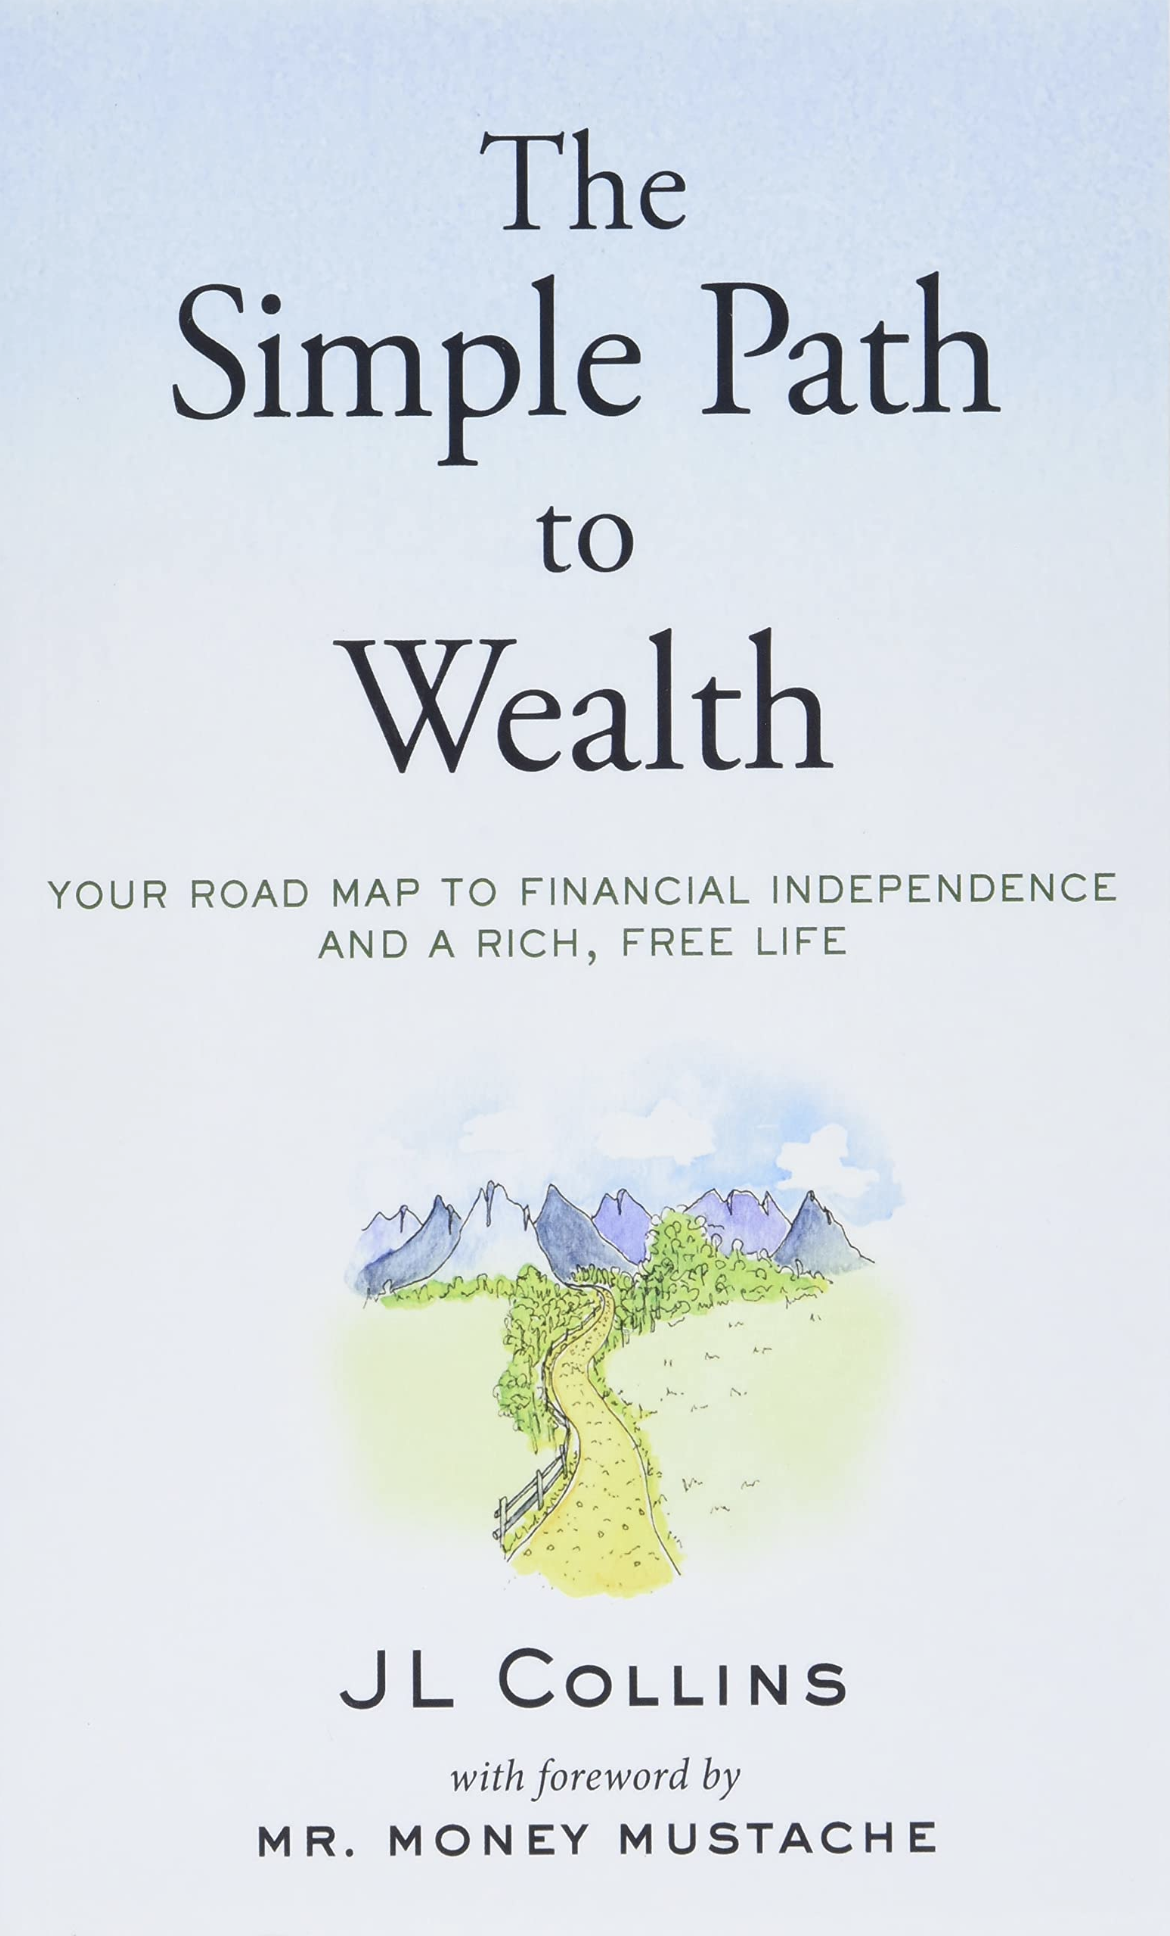 The Simple Path to Wealth: Your Roadmap to Financial Independence and A Rich, Free Life by JL Collins